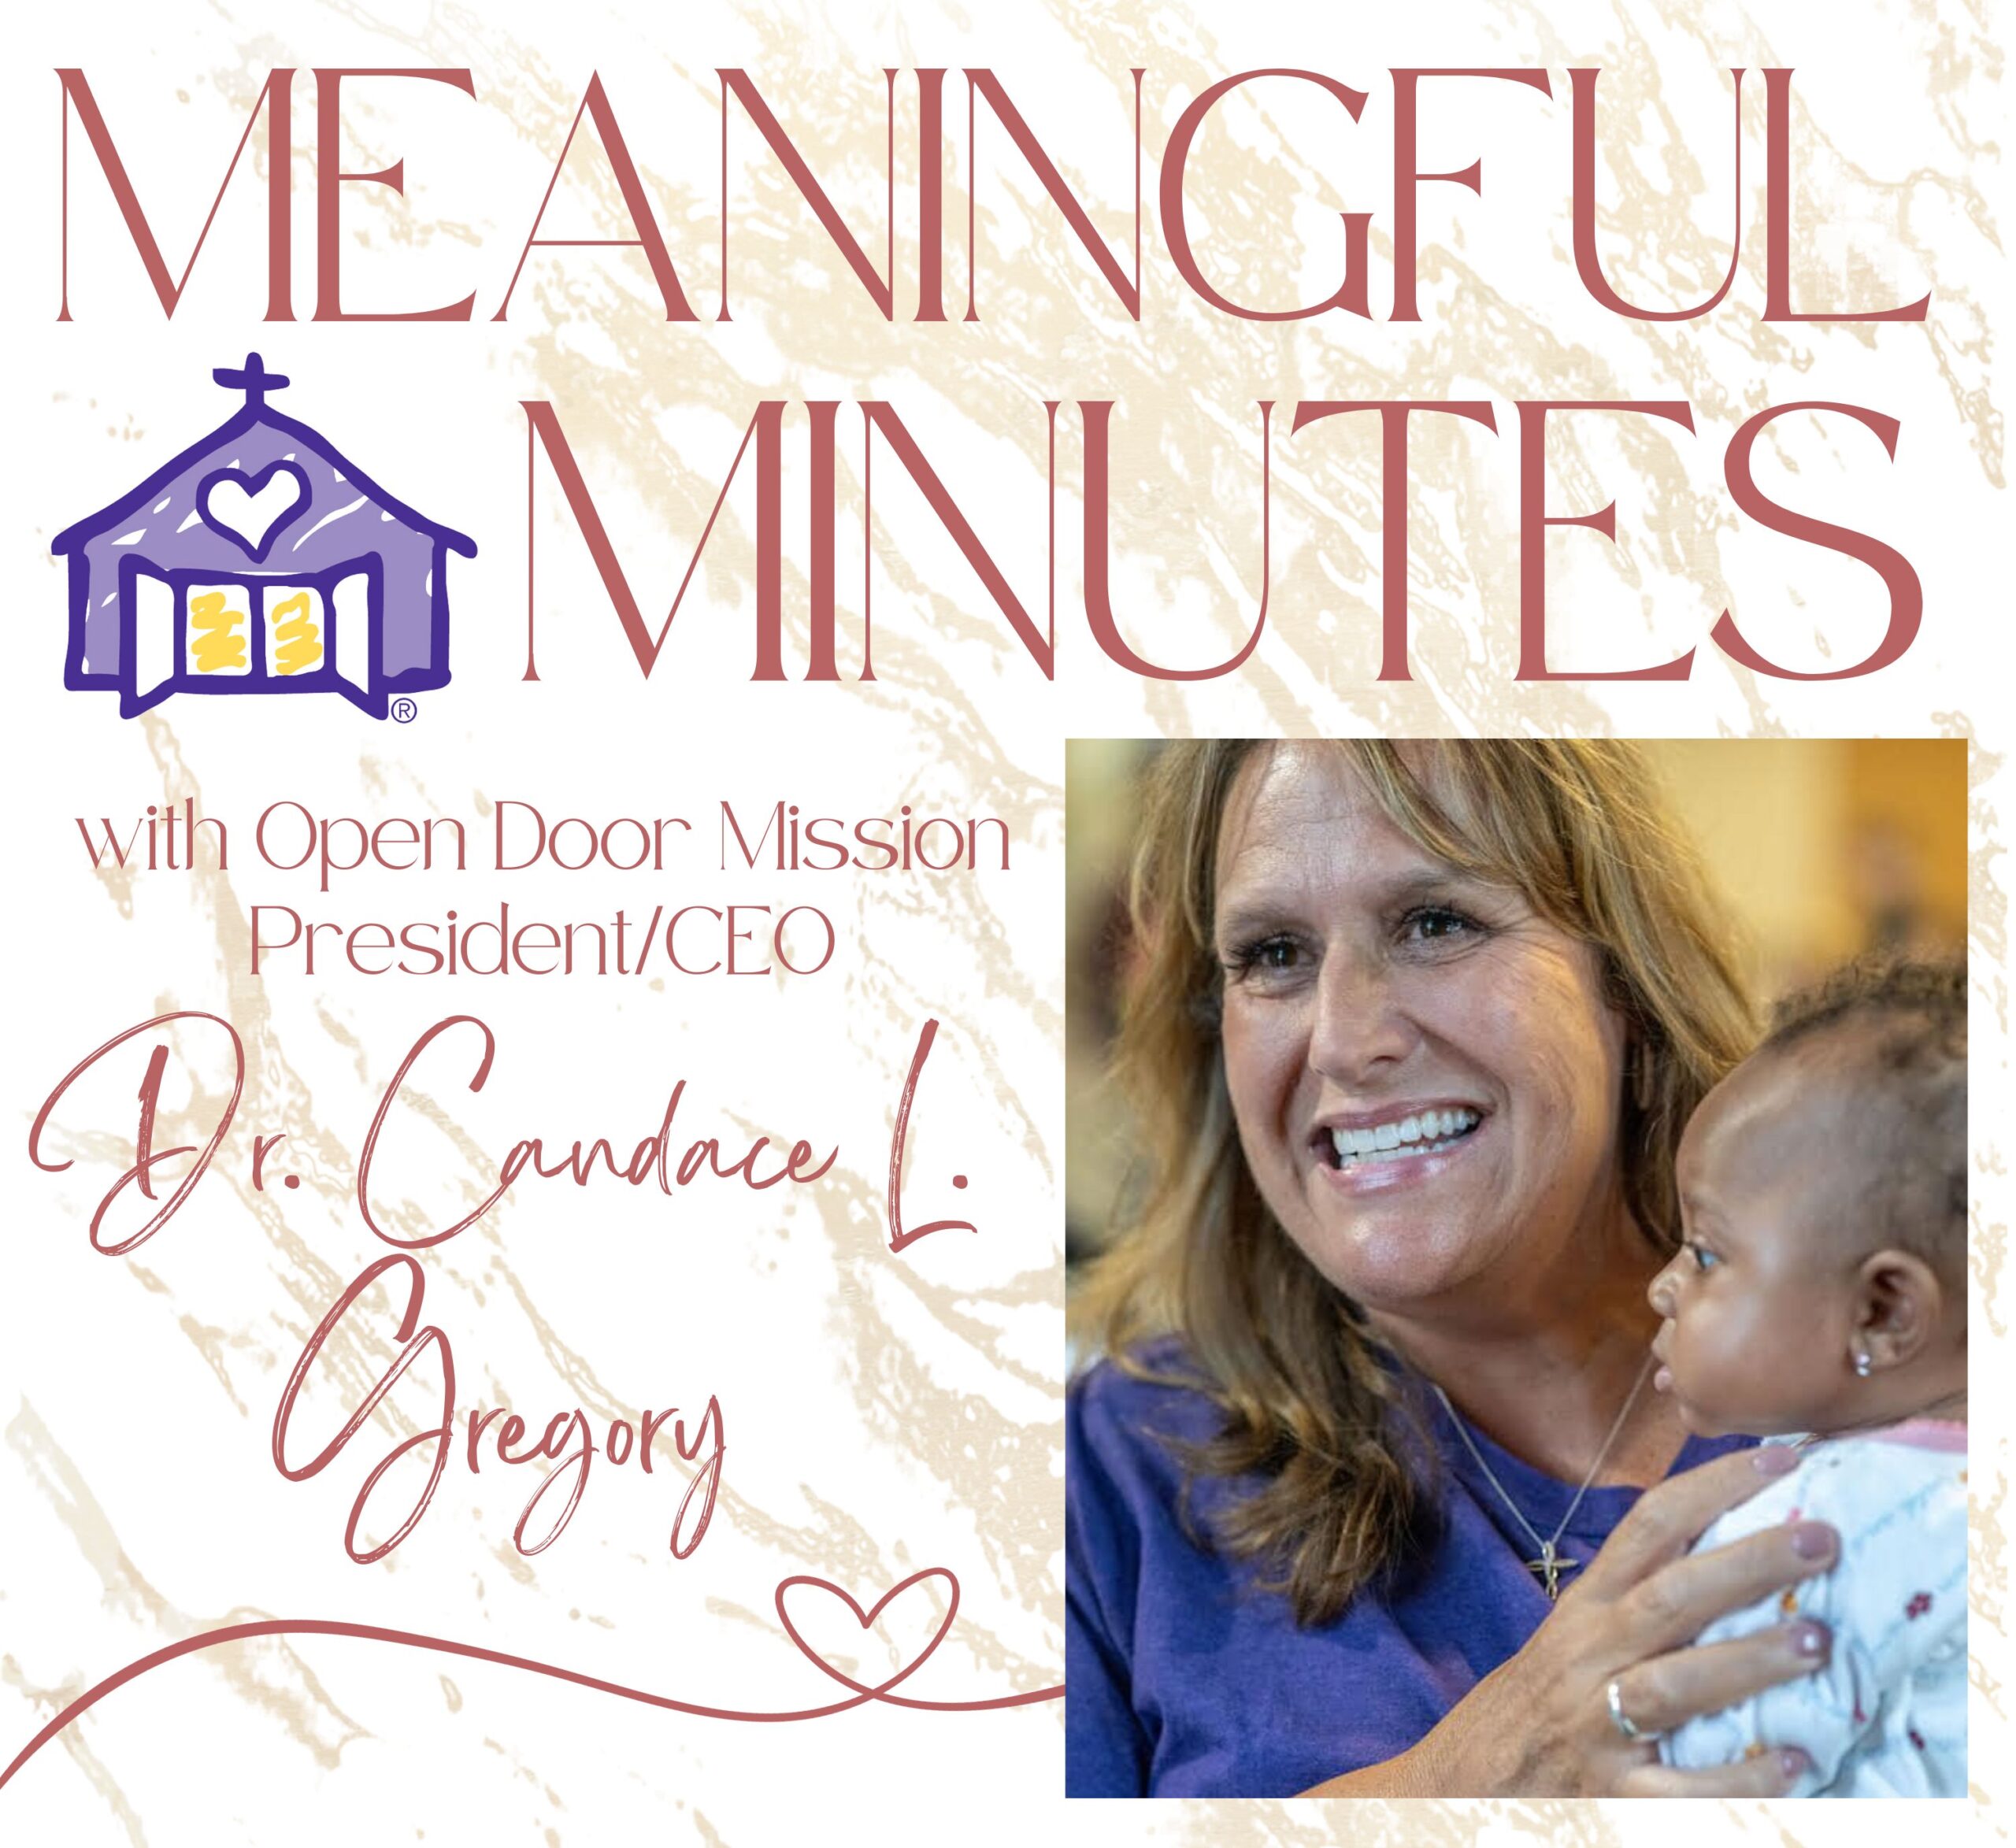 Meaningful Minutes with Dr. Candace L. Gregory